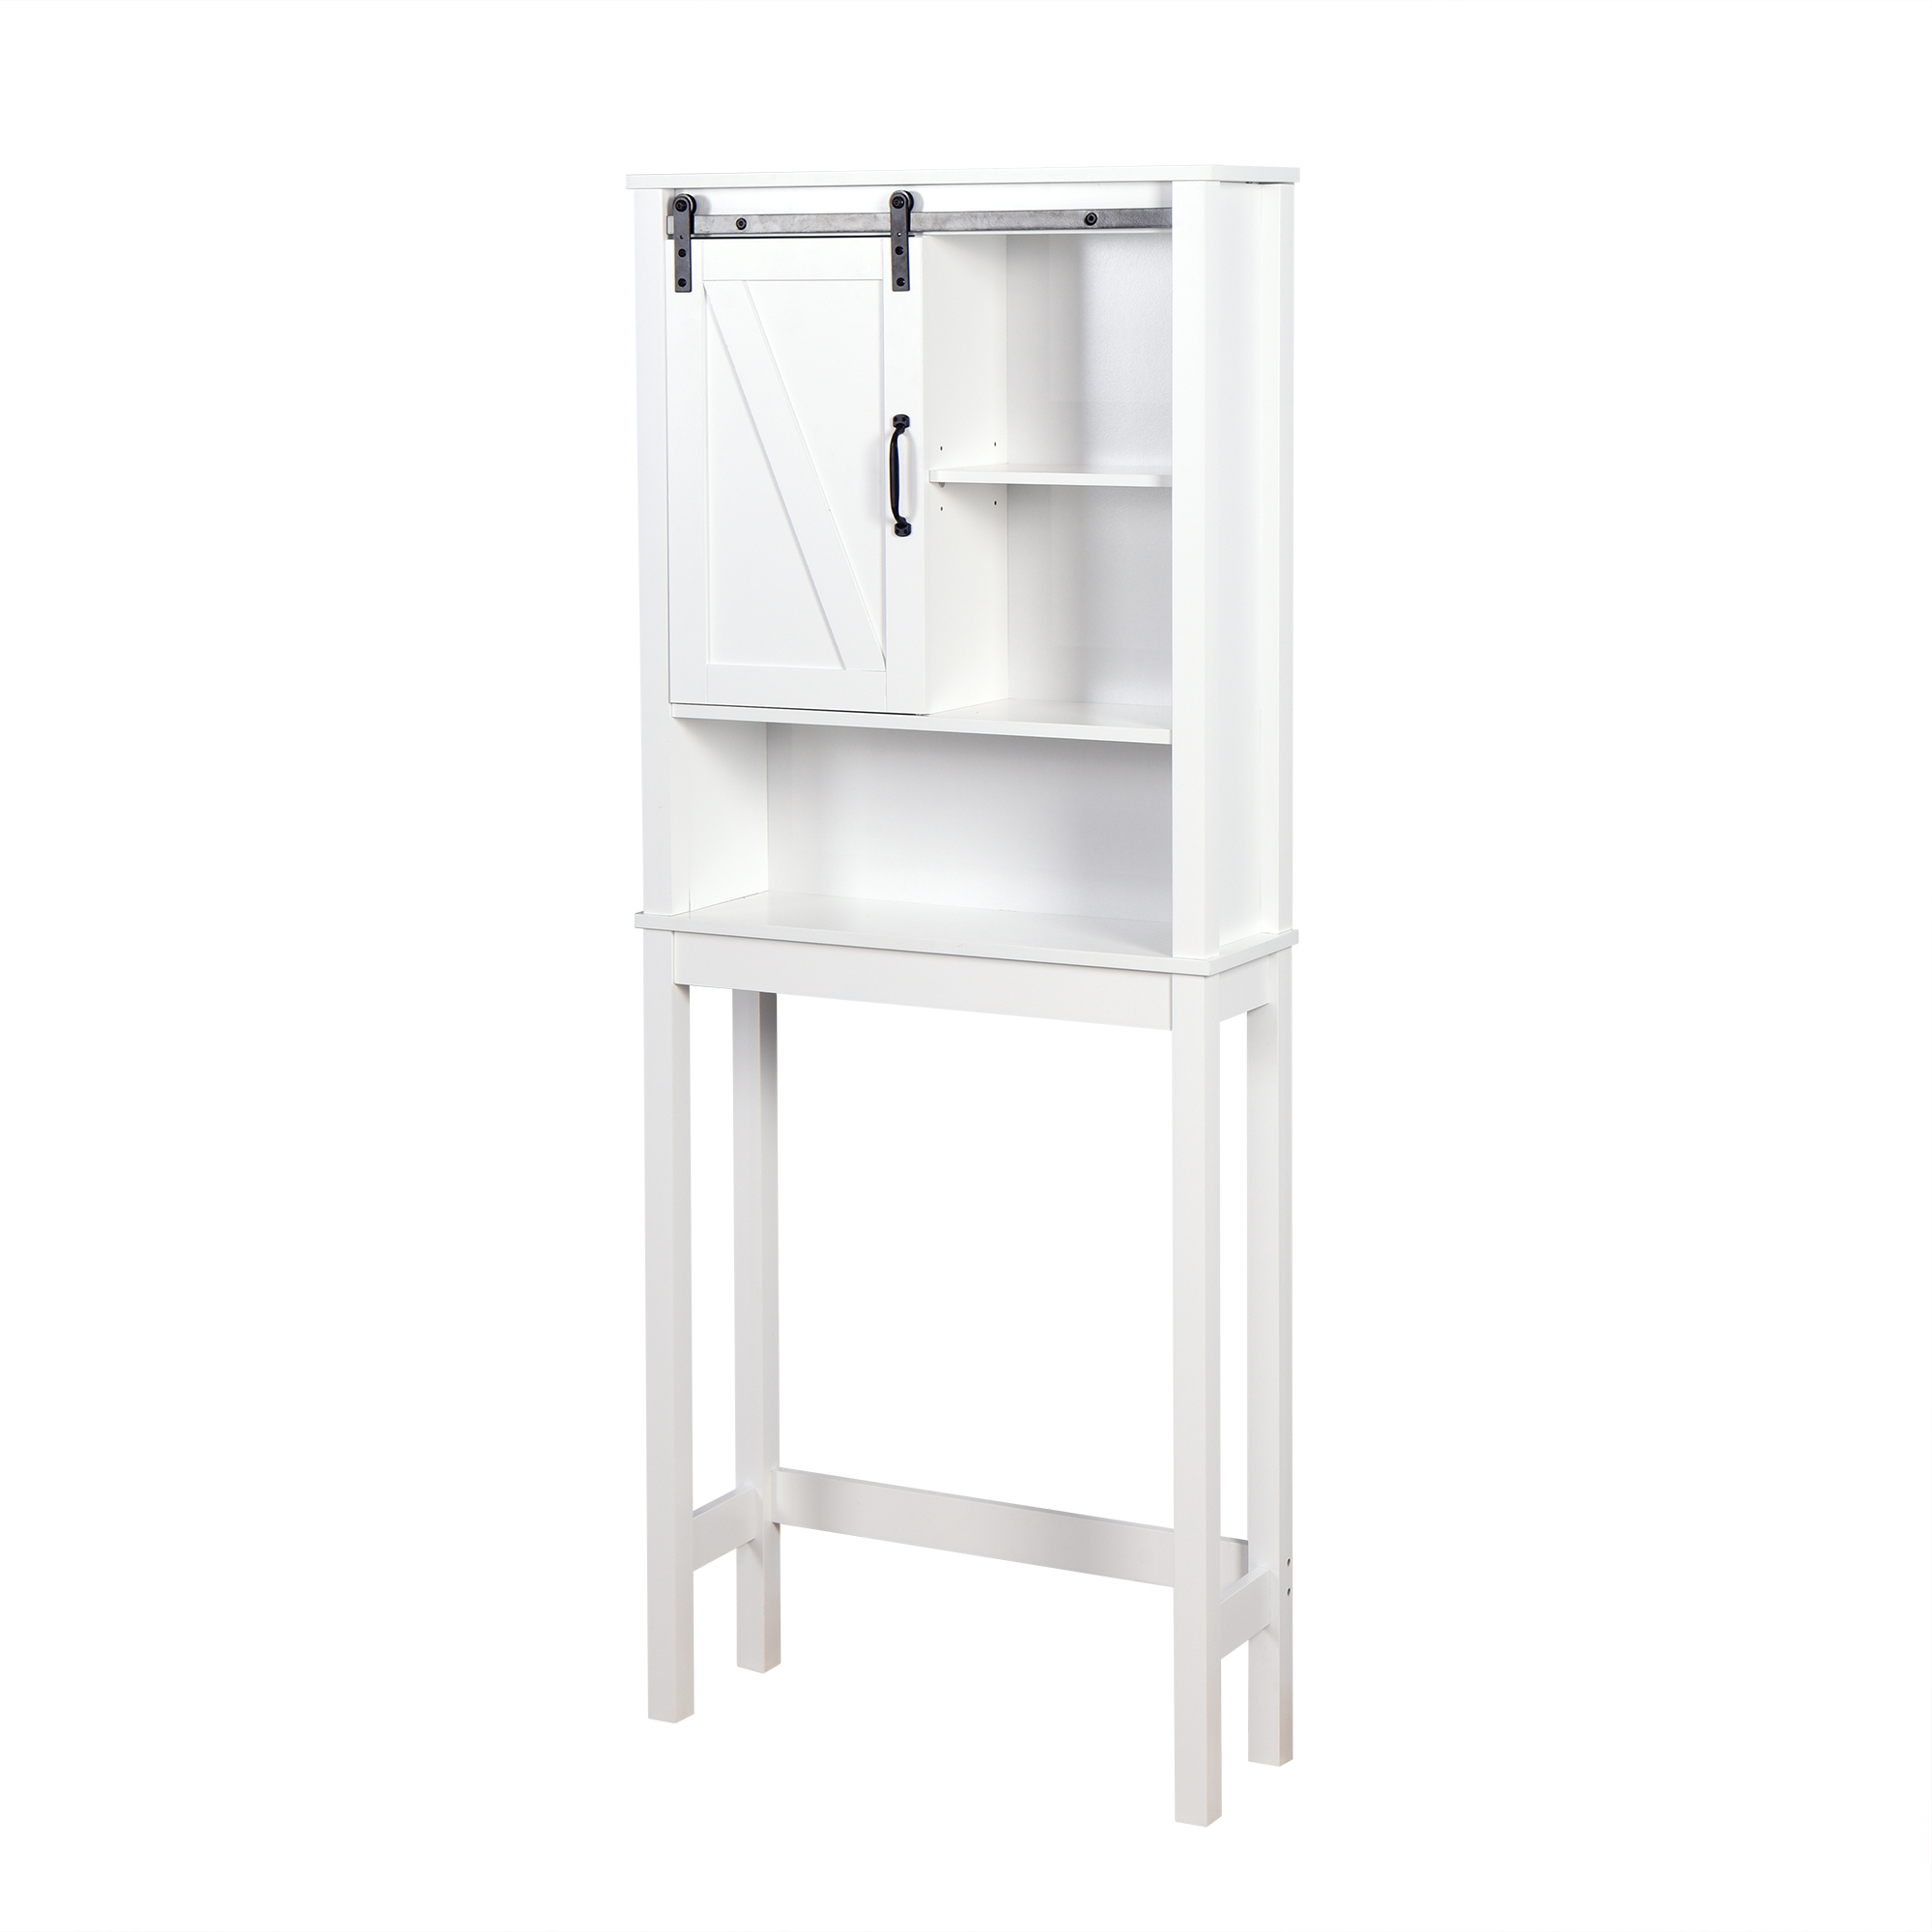 Over-the-Toilet Storage Cabinet, Space-Saving Bathroom Cabinet, with Adjustable Shelves and A Barn Door 27.16 x 9.06 x 67 inch-Boyel Living